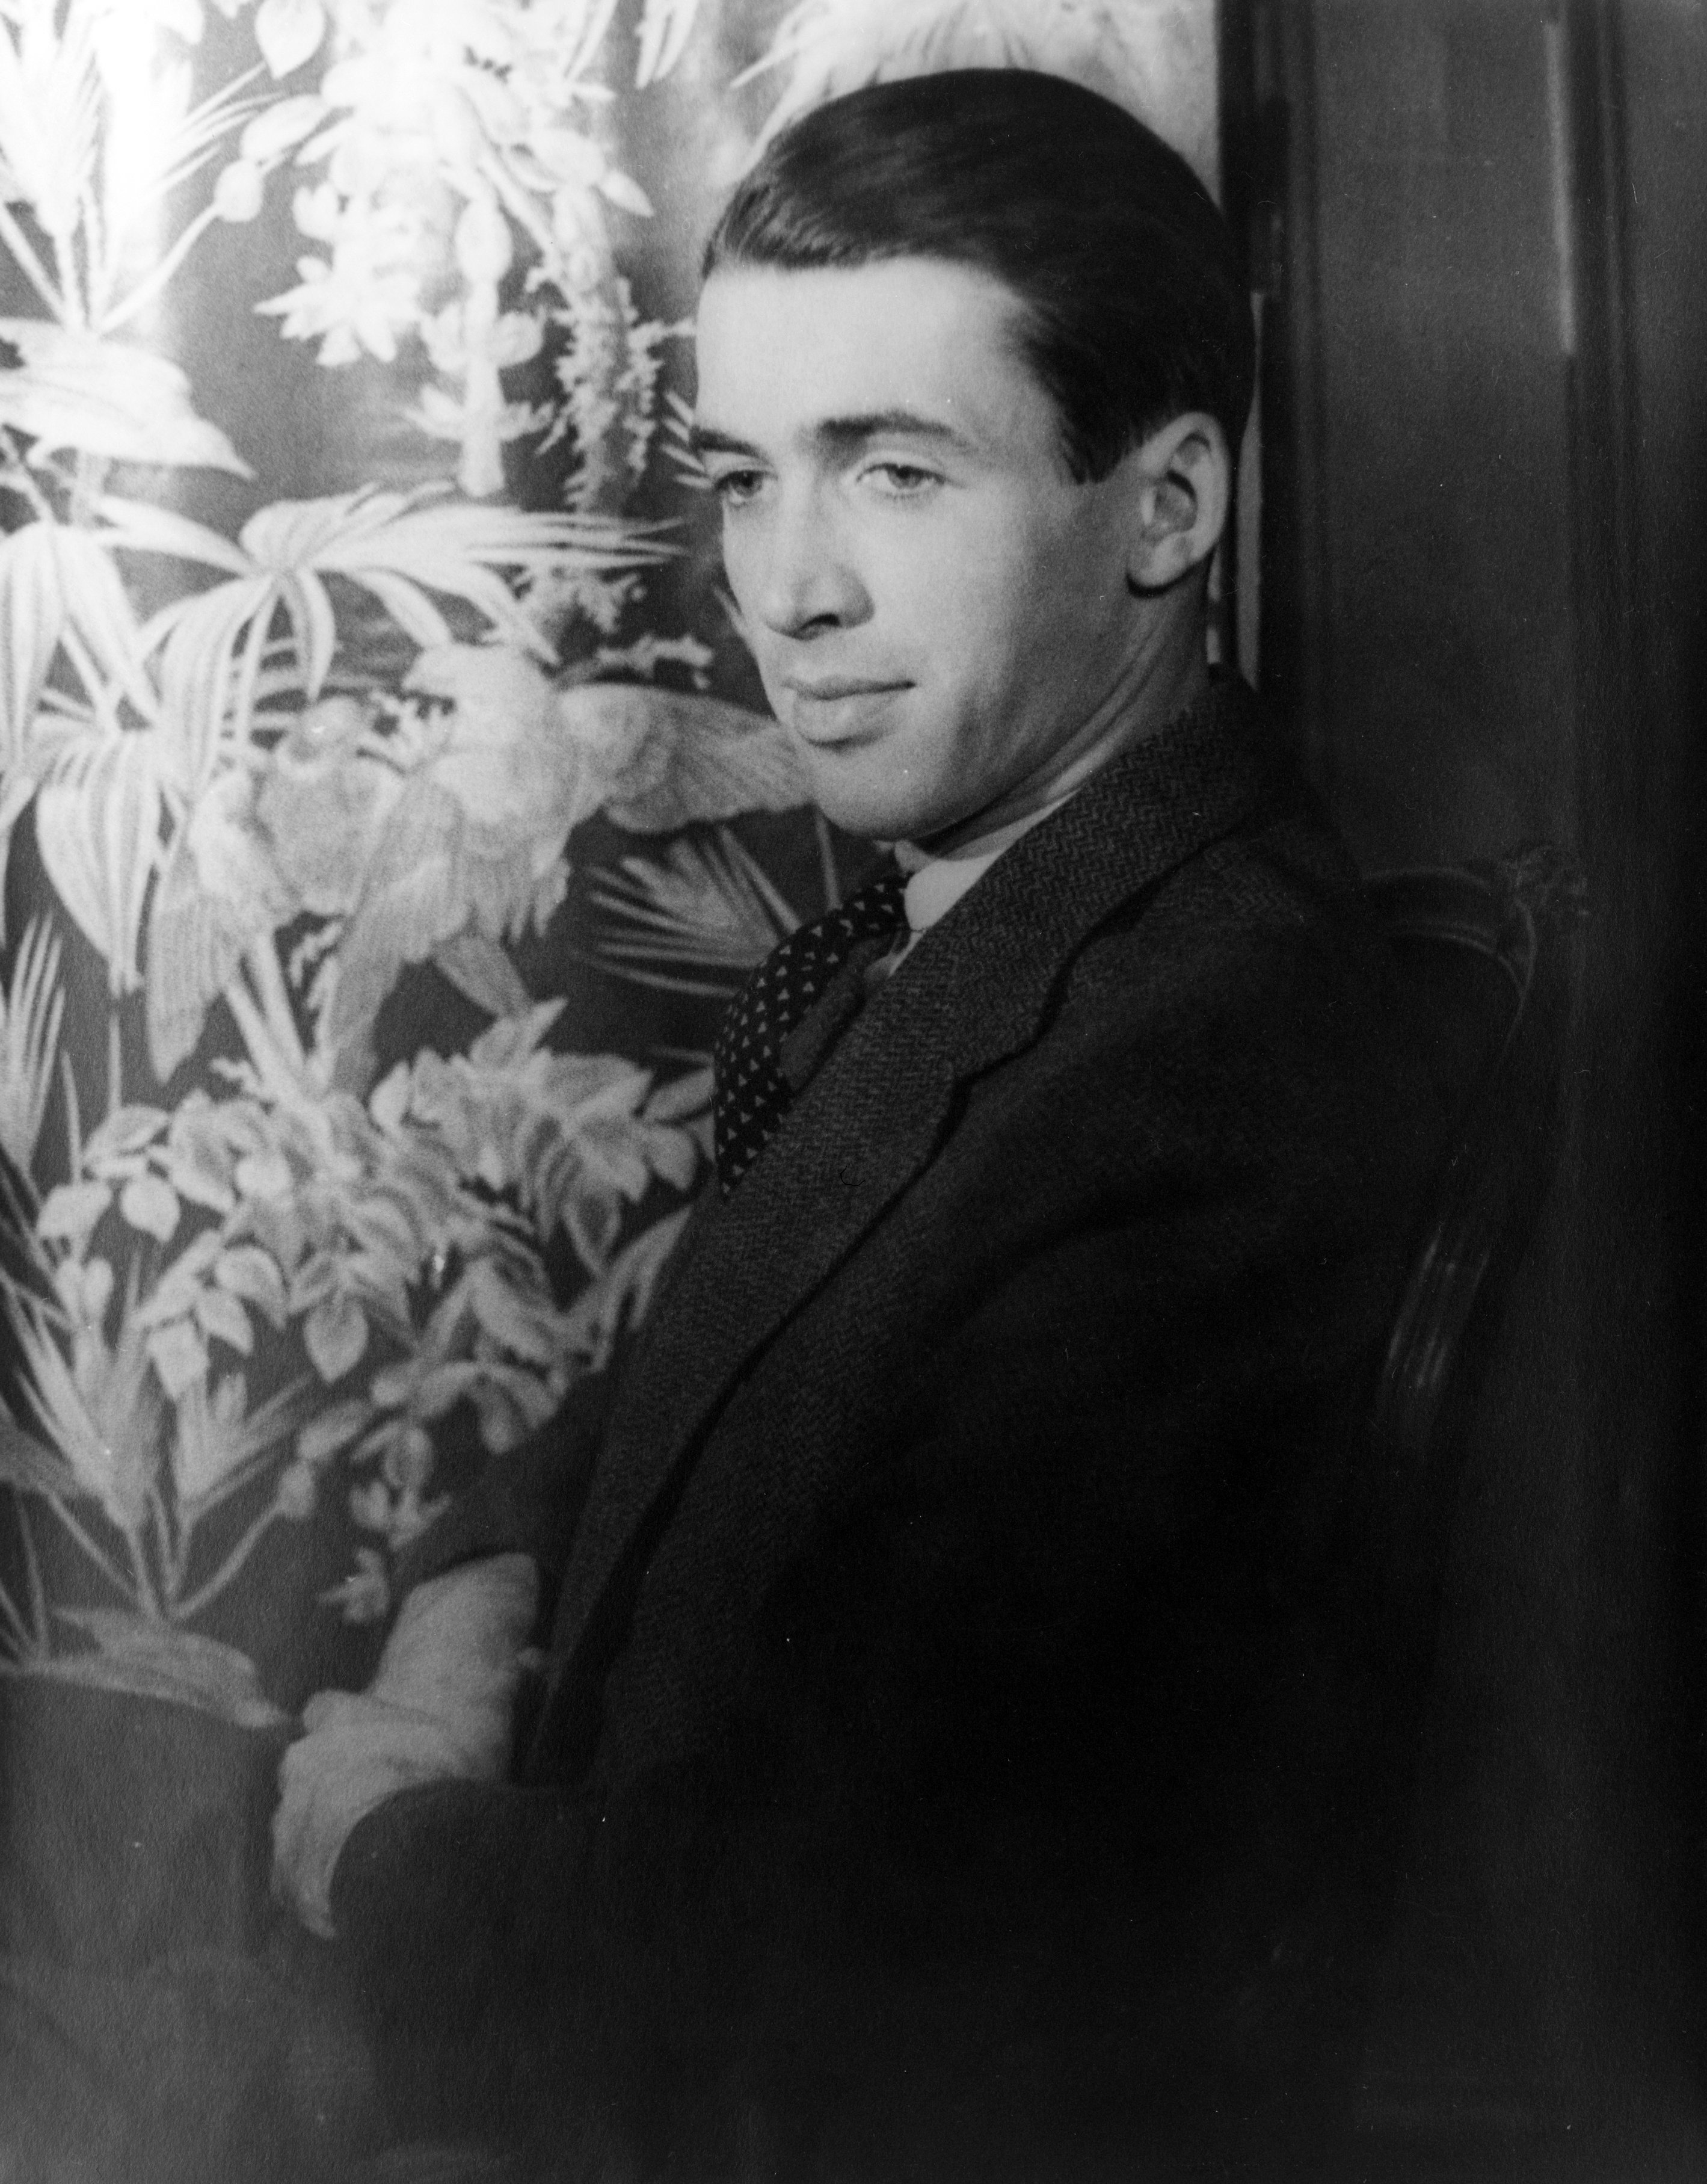 A portrait picture taken of Jimmy Stewart on 15 October 1934. | Photo: Wikimedia Commons